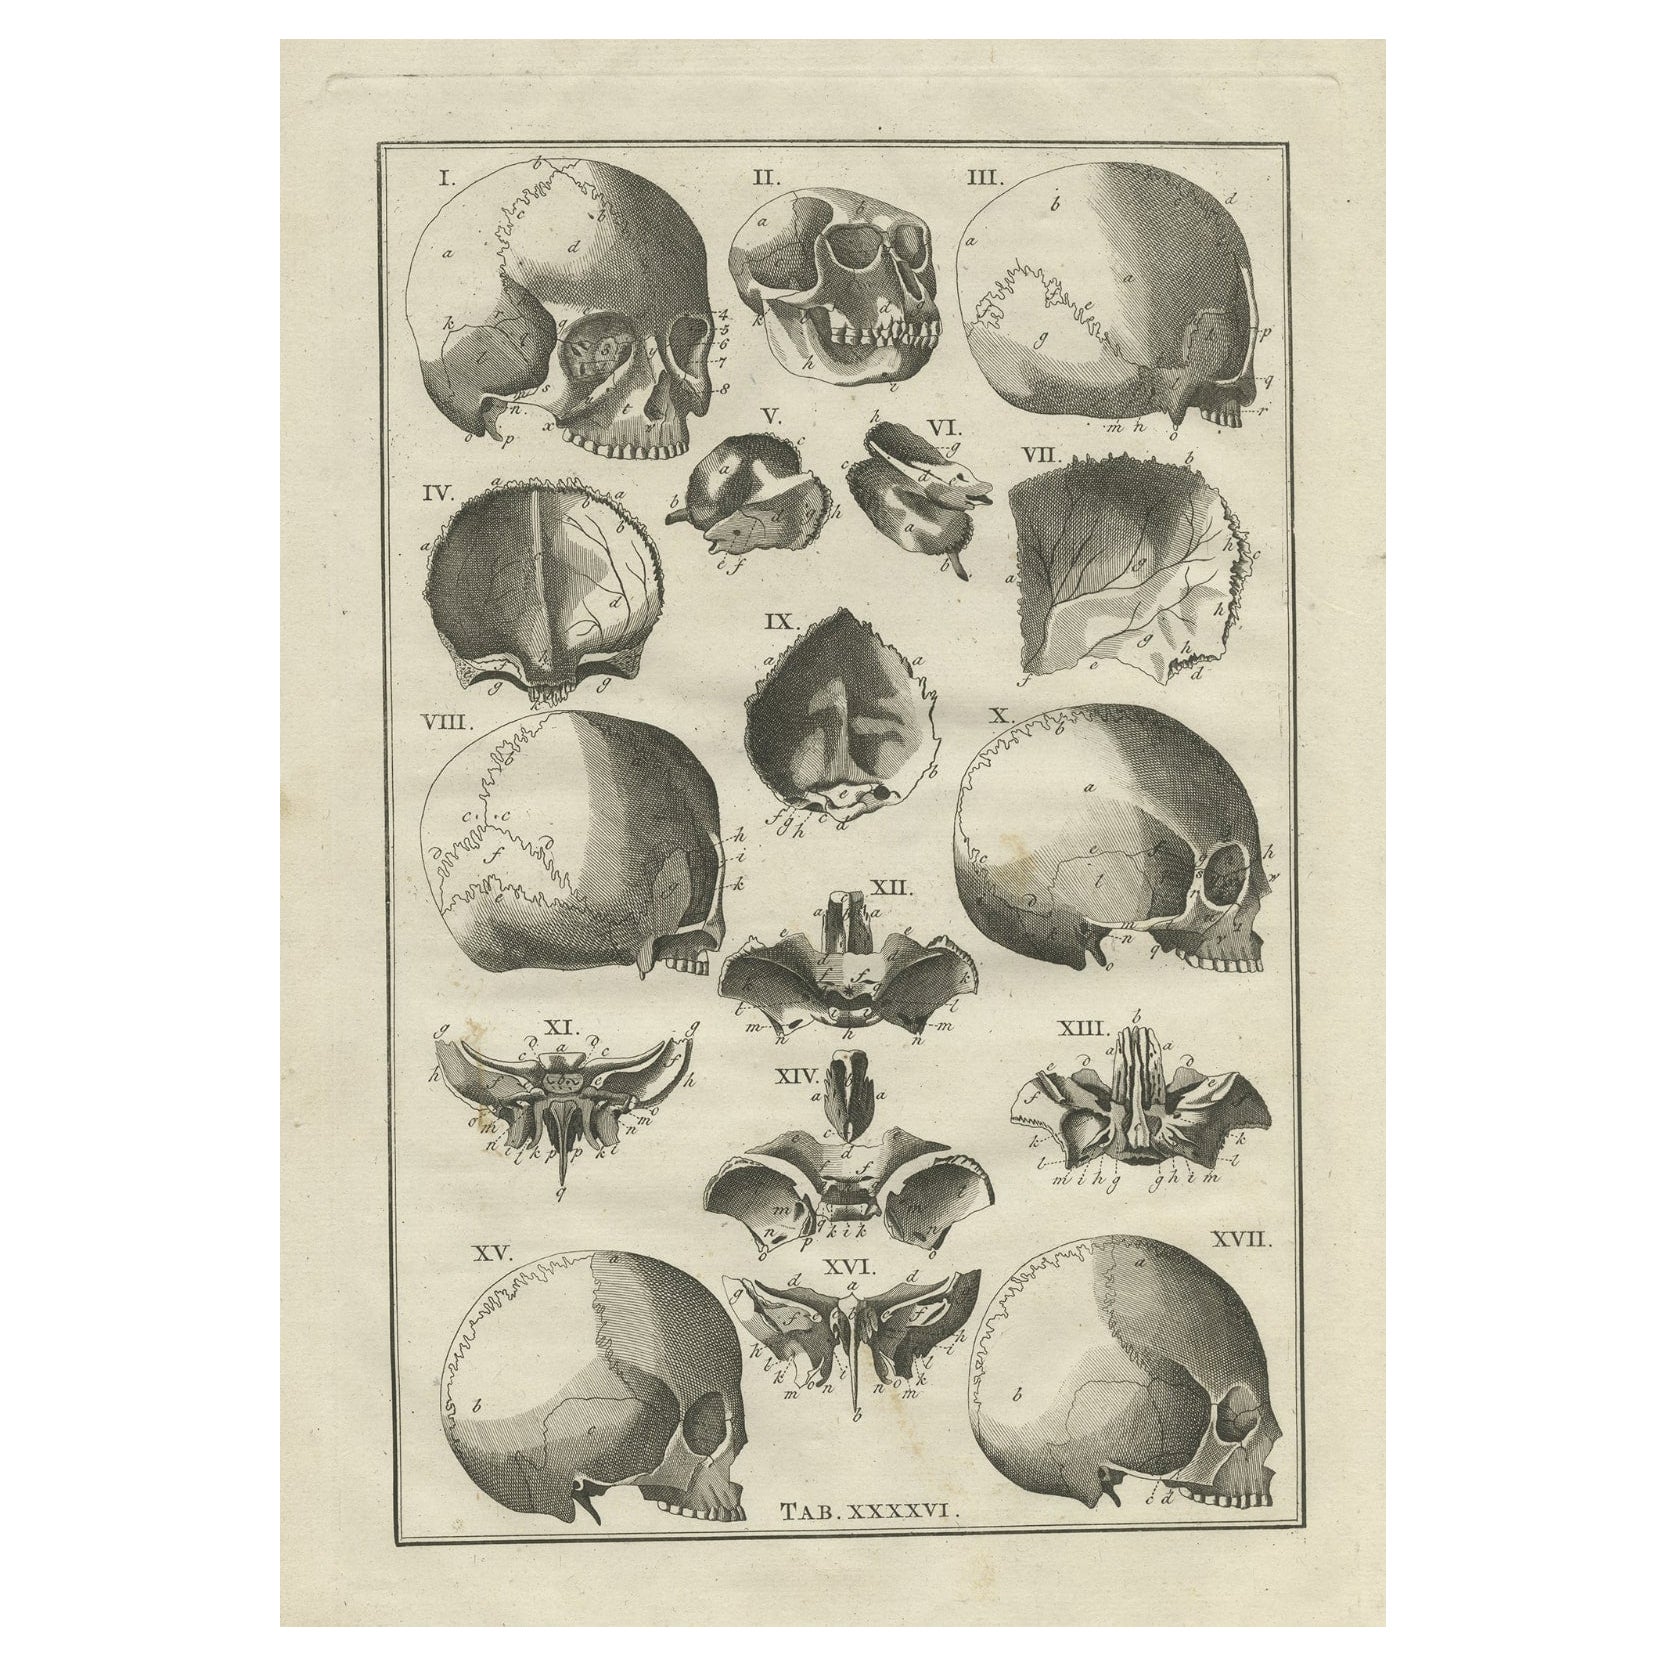 Antique Anatomy Print of the Head, Also Includes the Head of a Monkey, 1798